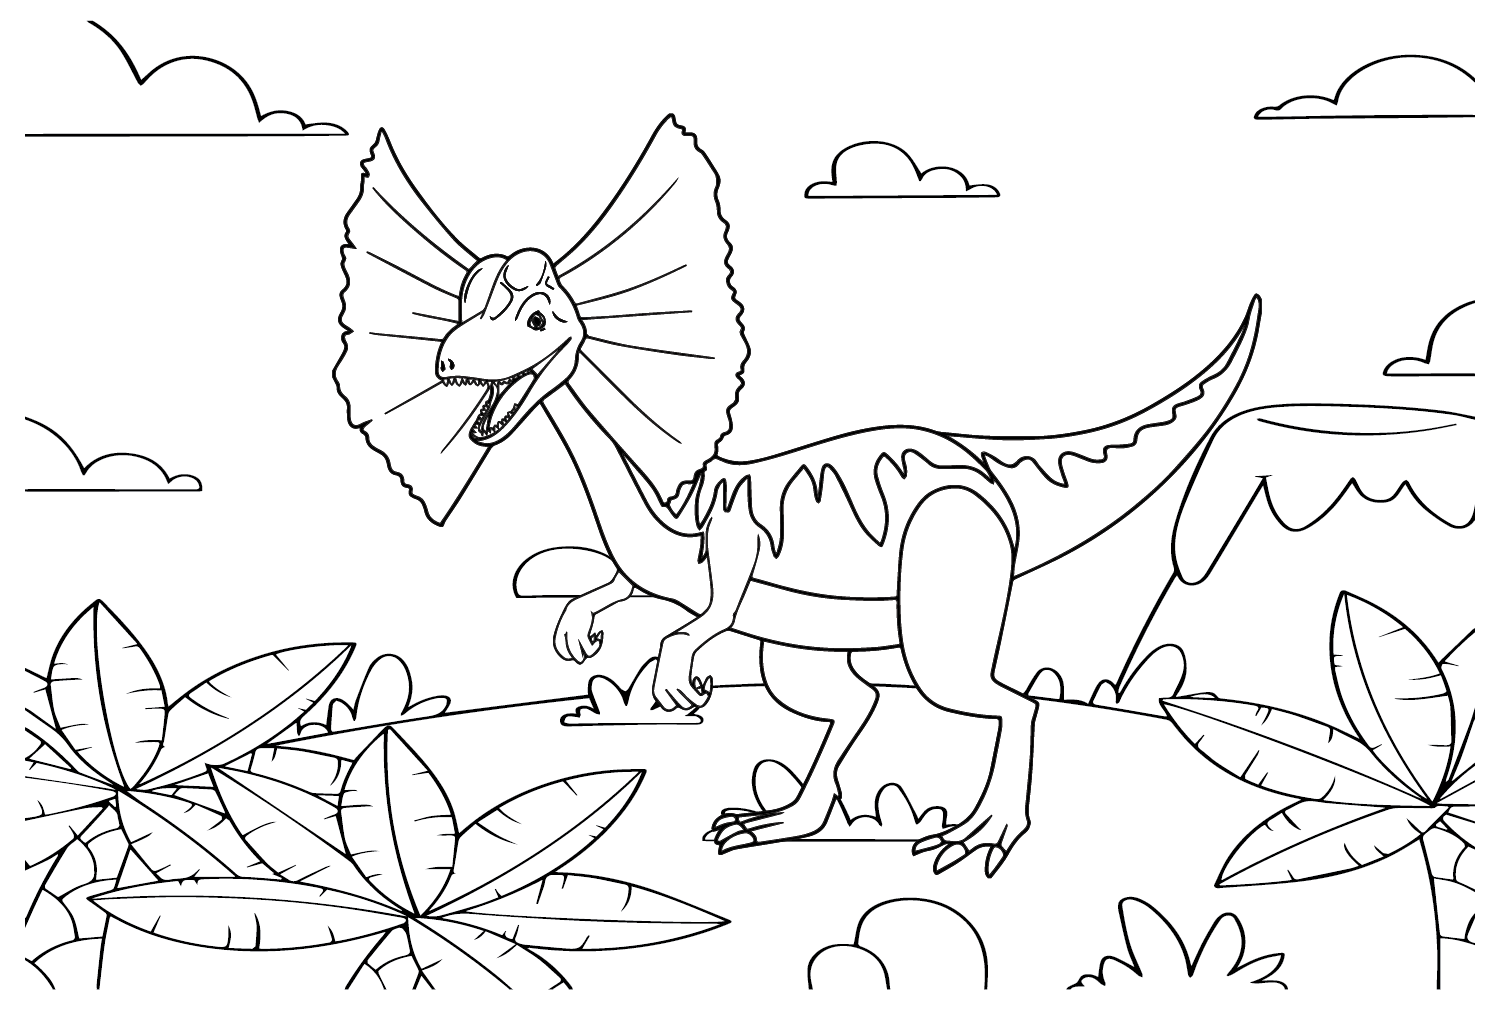 Drawing Dilophosaurus Coloring Page from Dilophosaurus